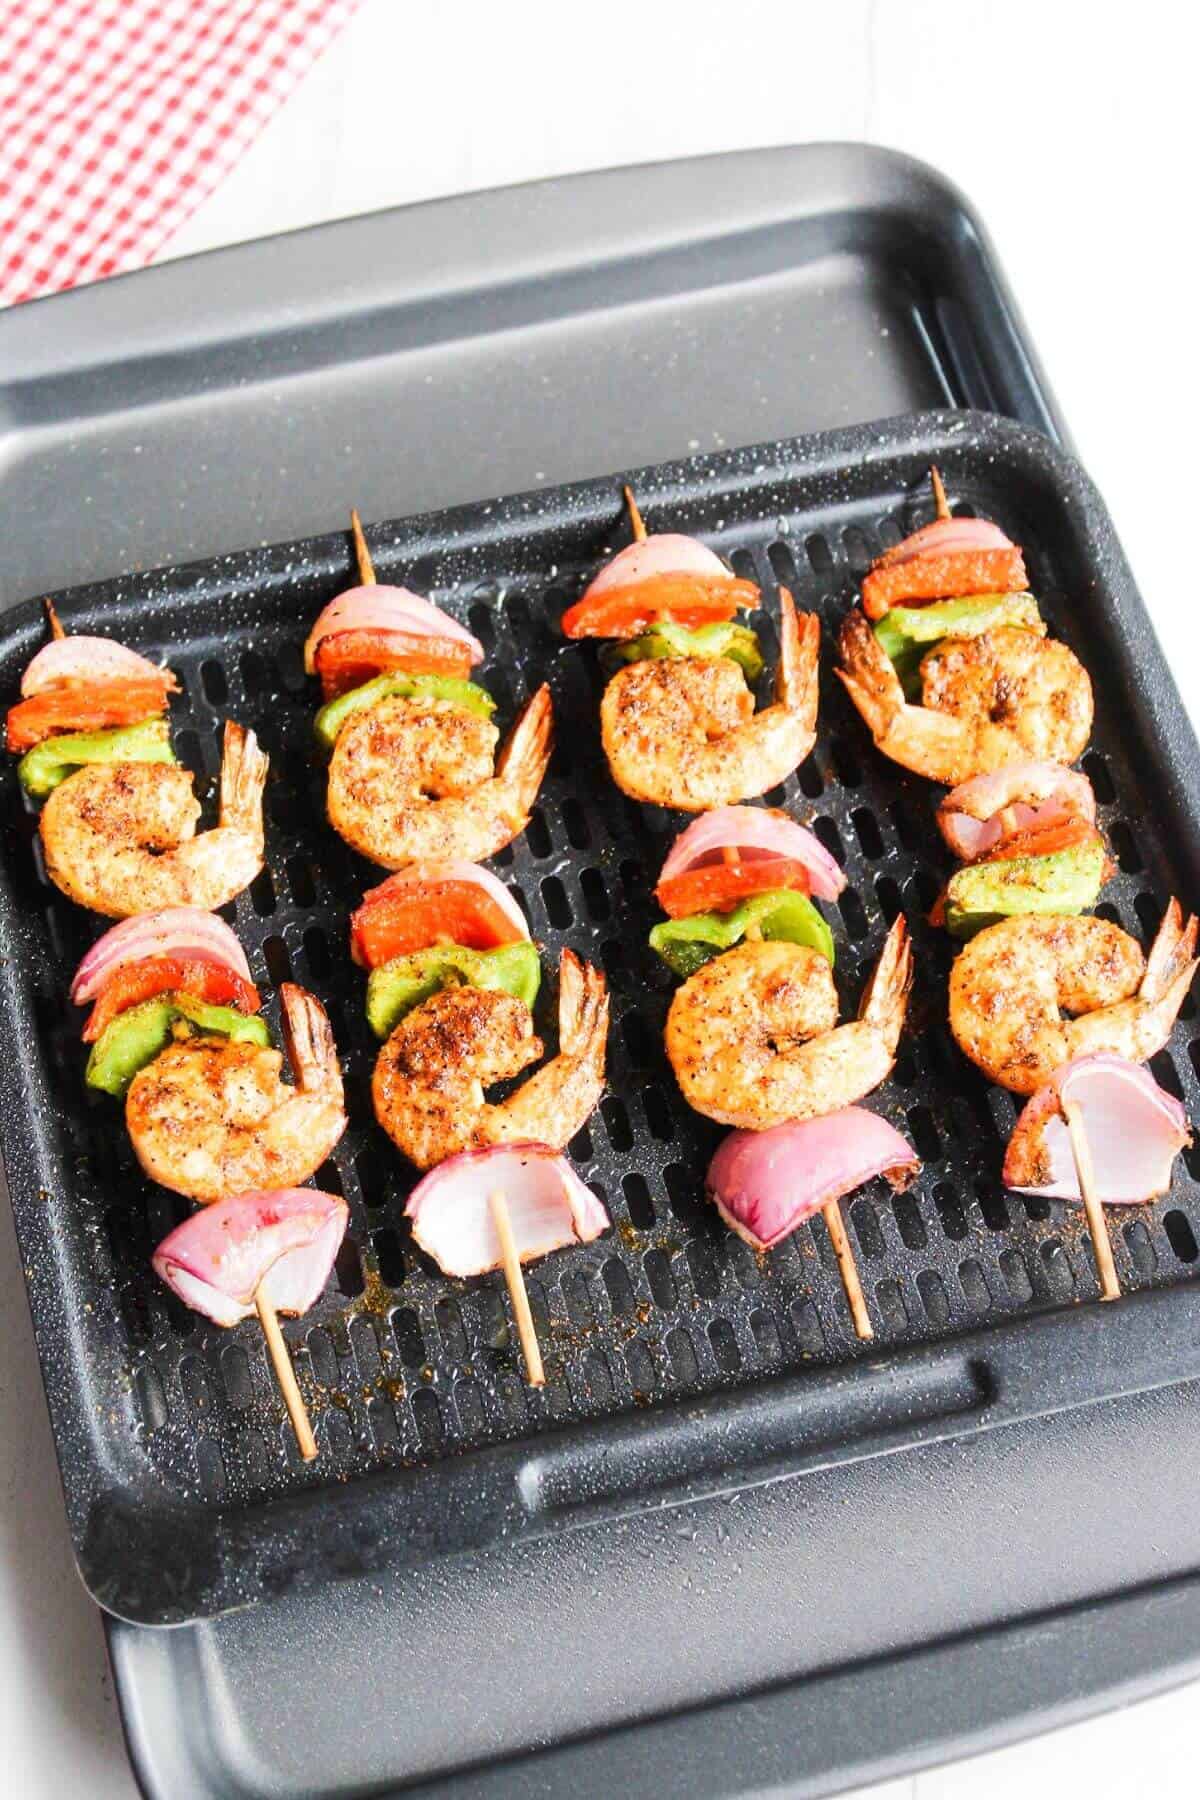 Cooked shrimp skewers on air fryer tray.